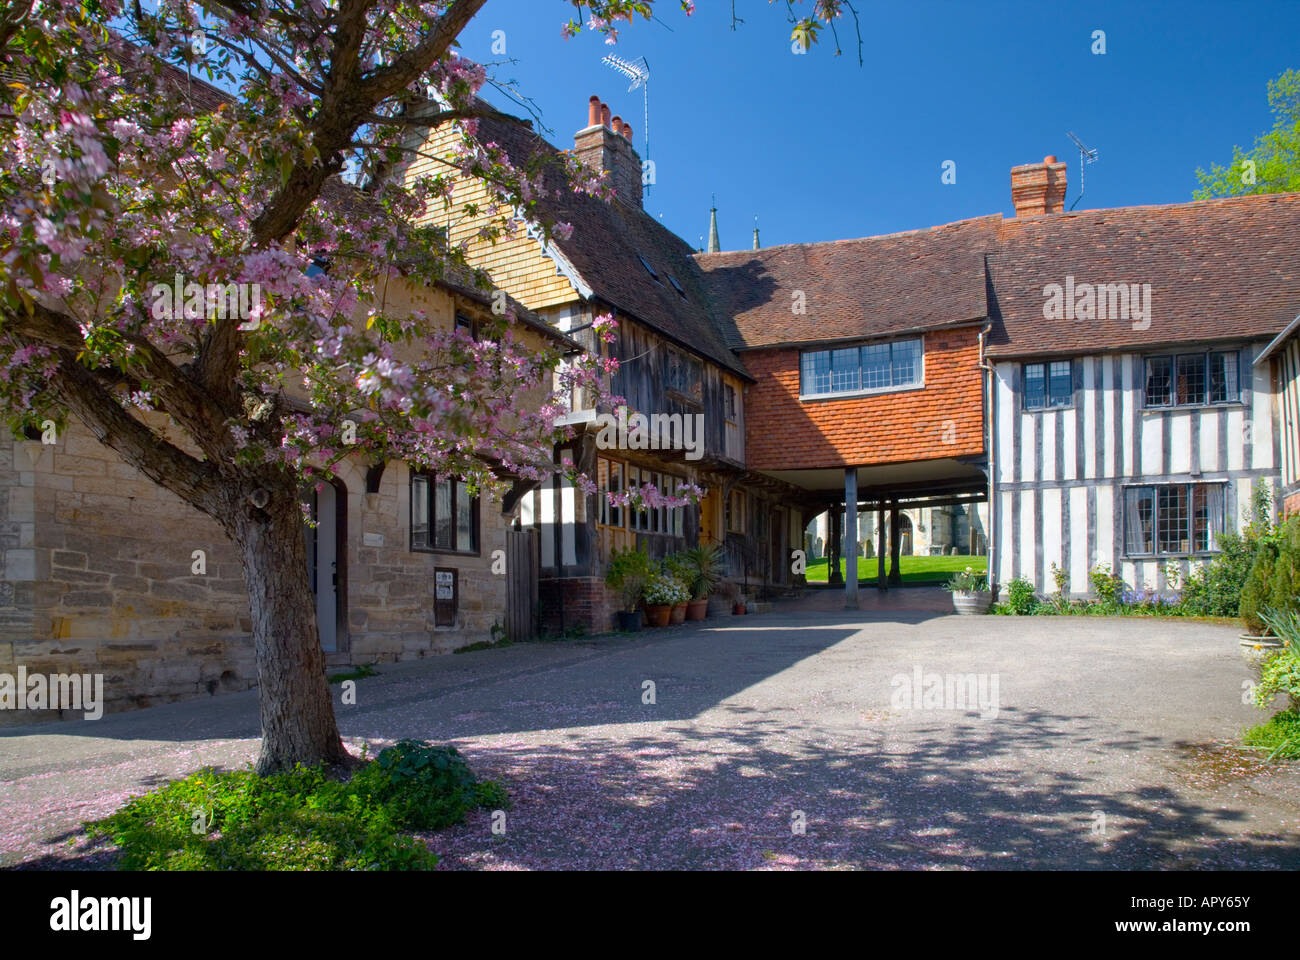 Penshurst, Kent, England. Picturesque medieval houses overlooking Leicester Square. Stock Photo